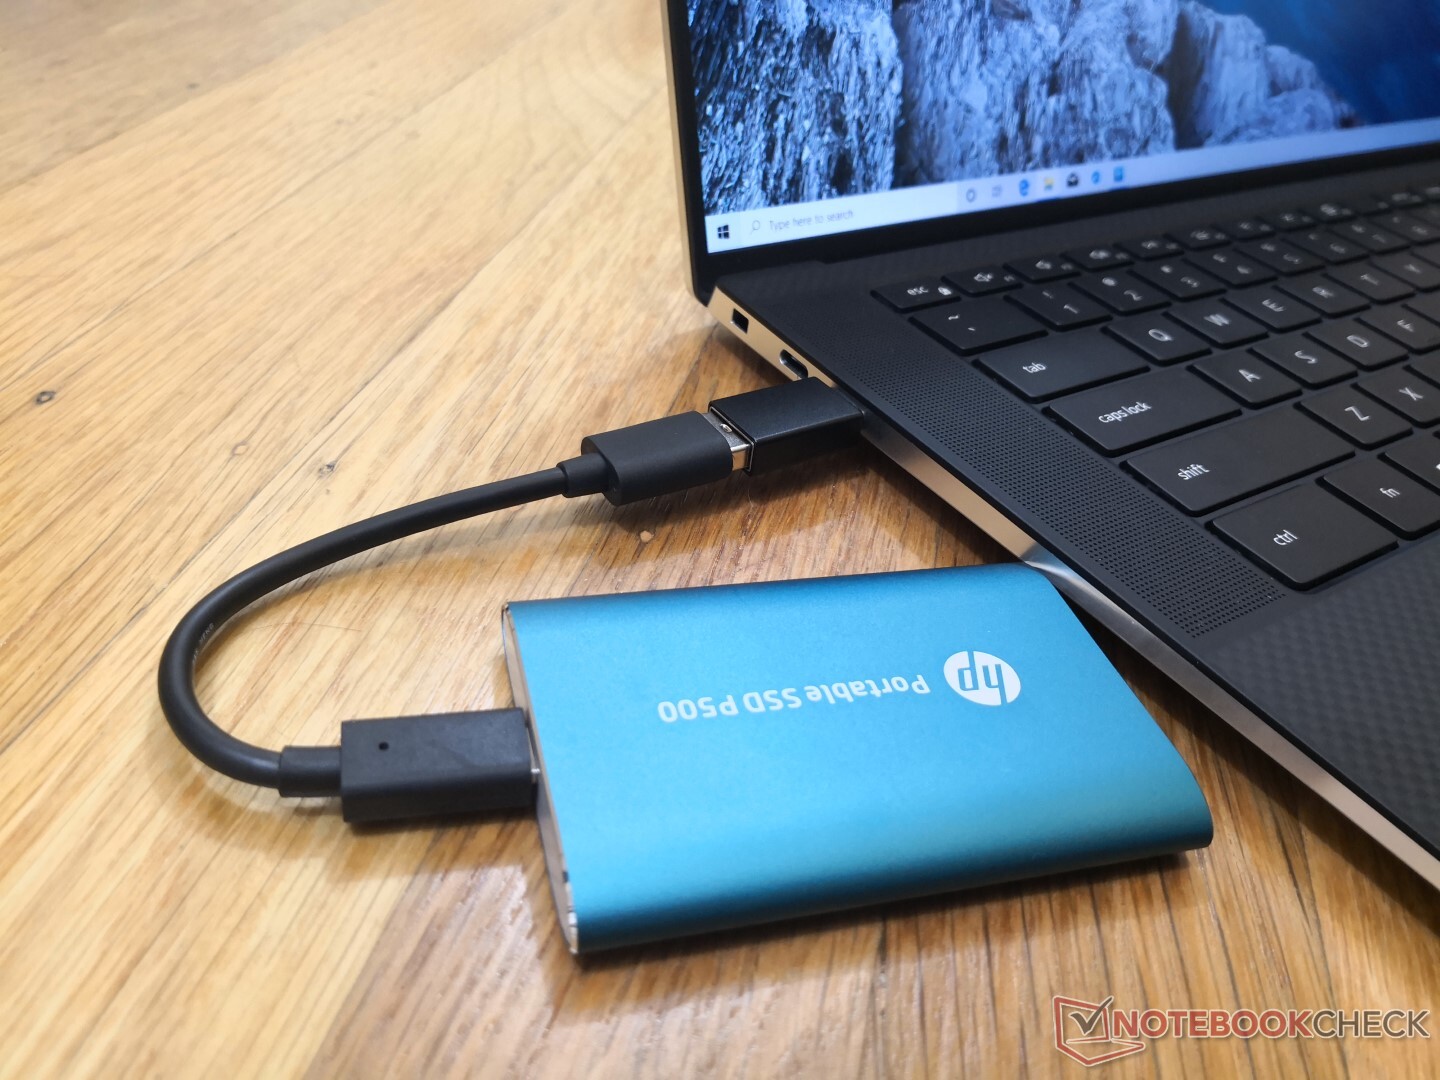 All-aluminum 1 TB HP P500 external SSD weighs just 1.7 oz, offers up to 460  MB/s read rates -  News